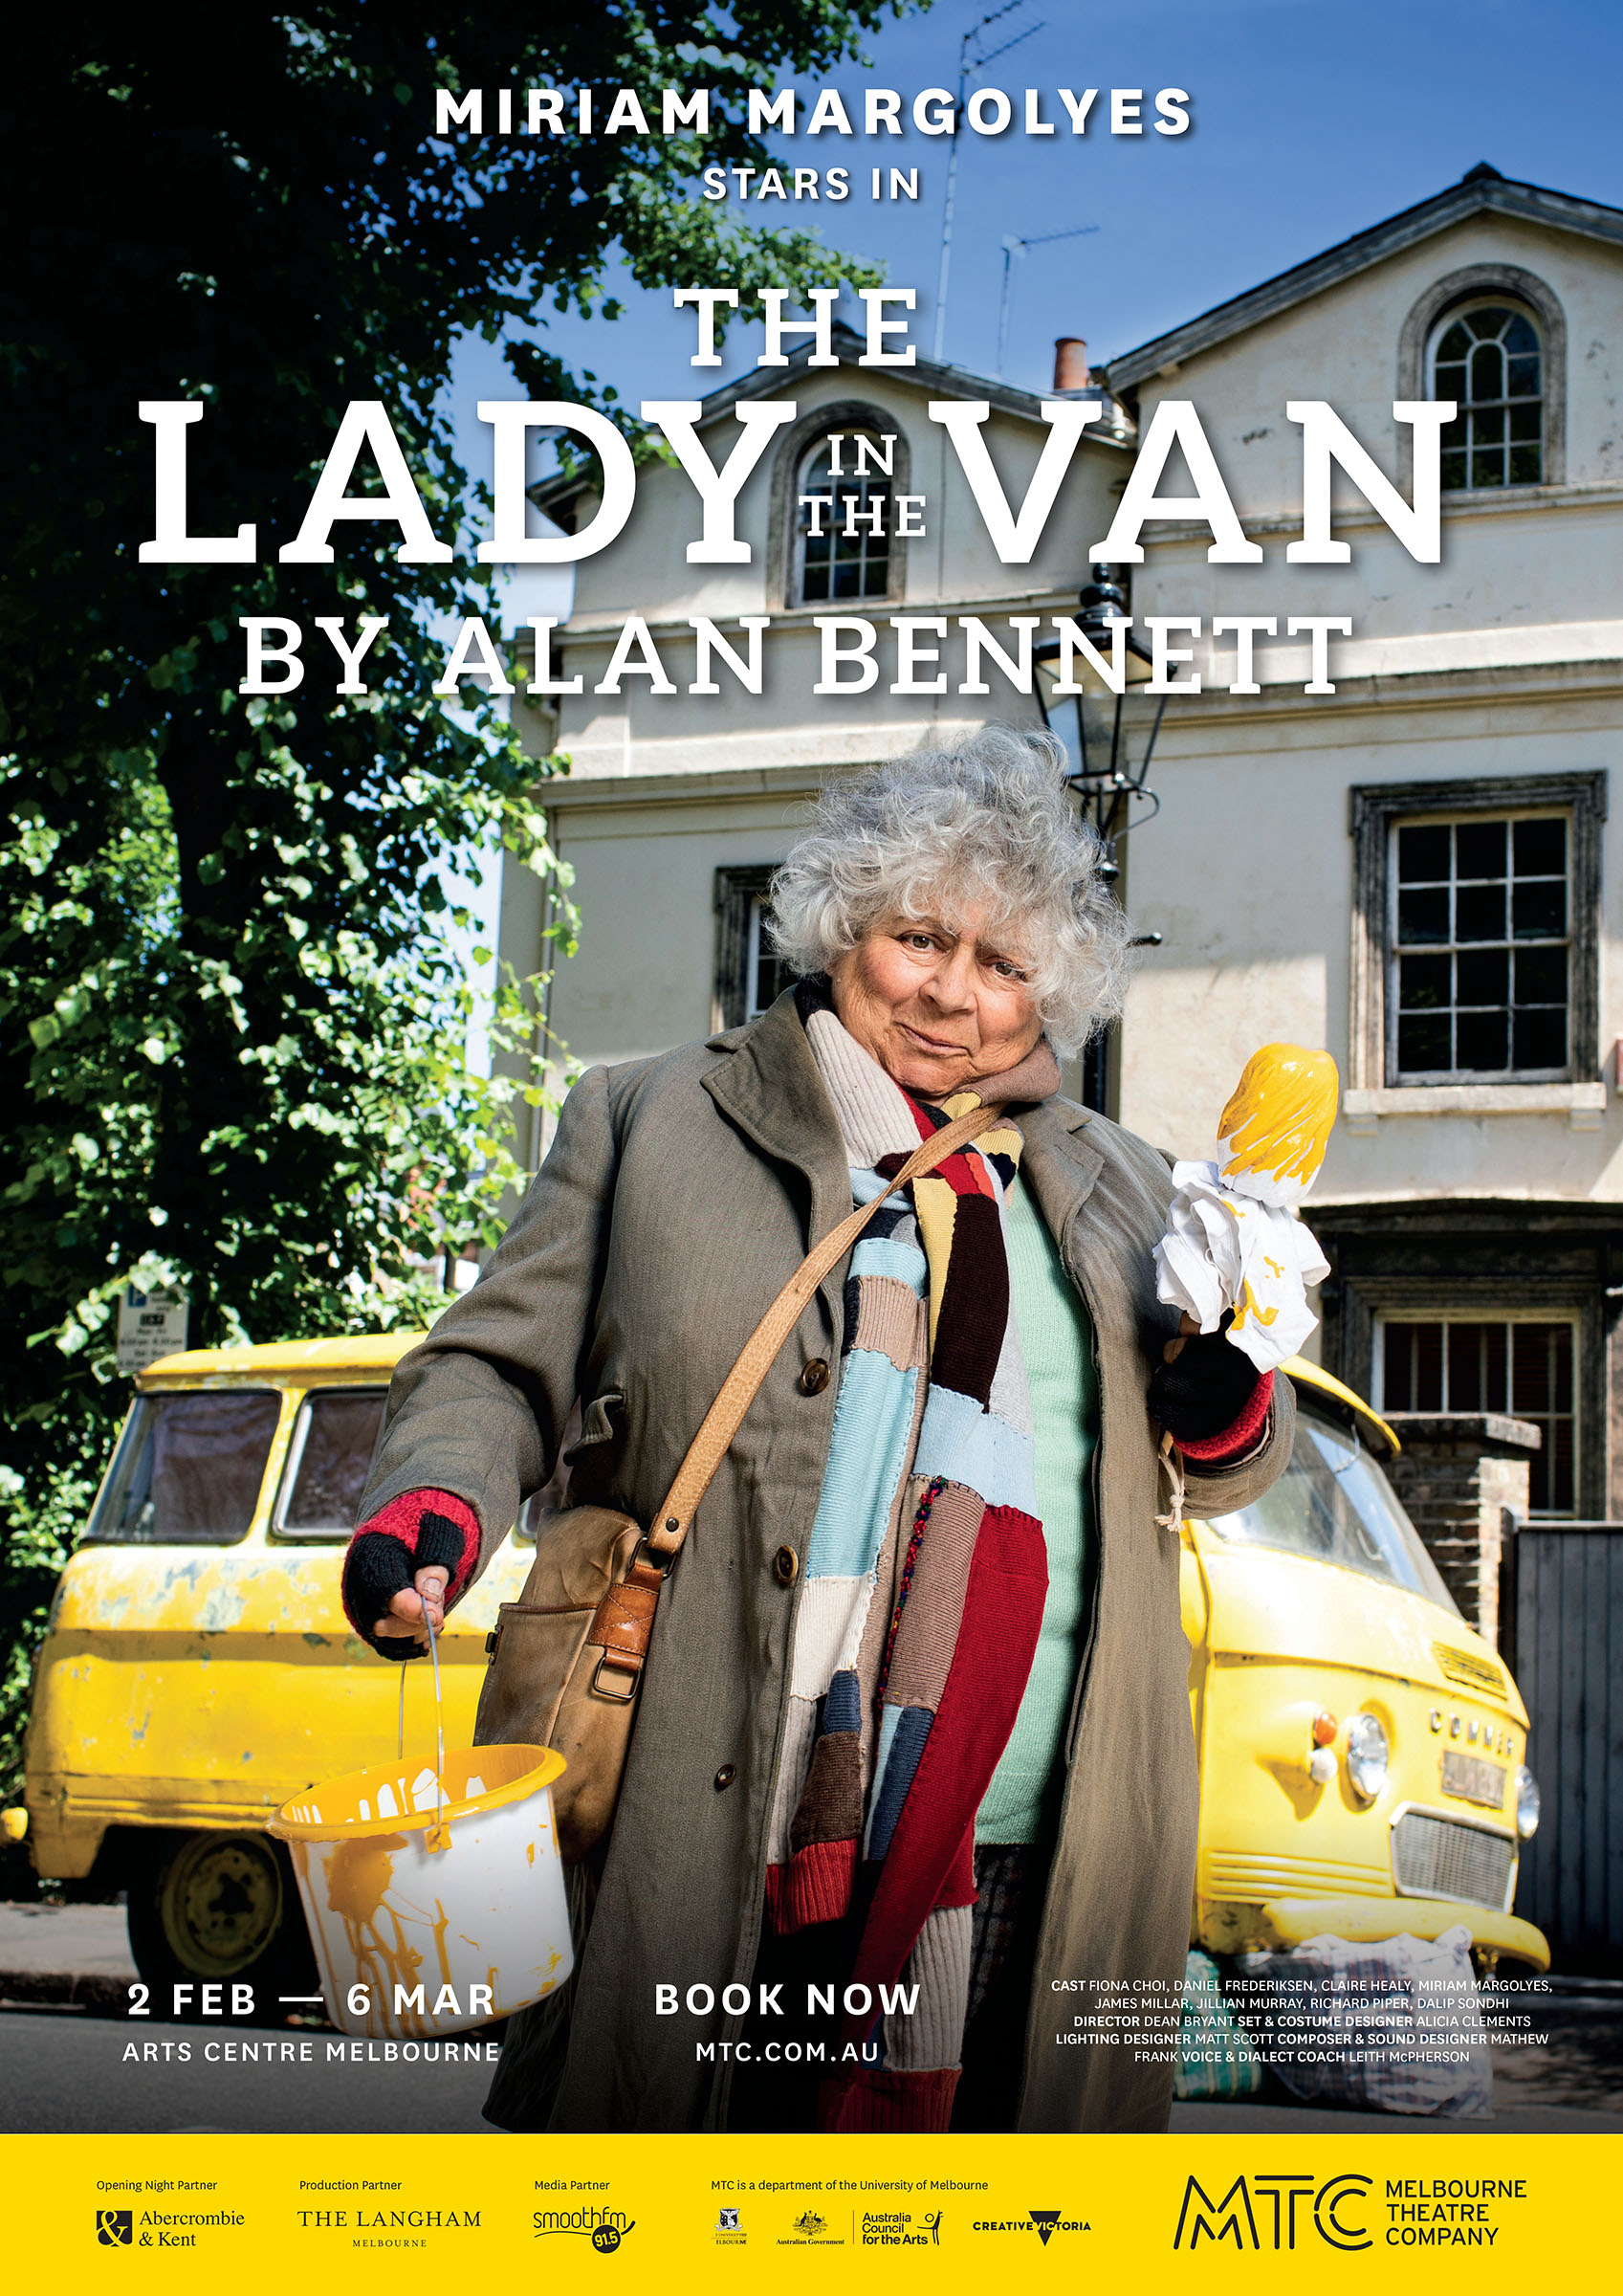 Poster for 'The Lady in the Van' featuring Miriam Margolyes